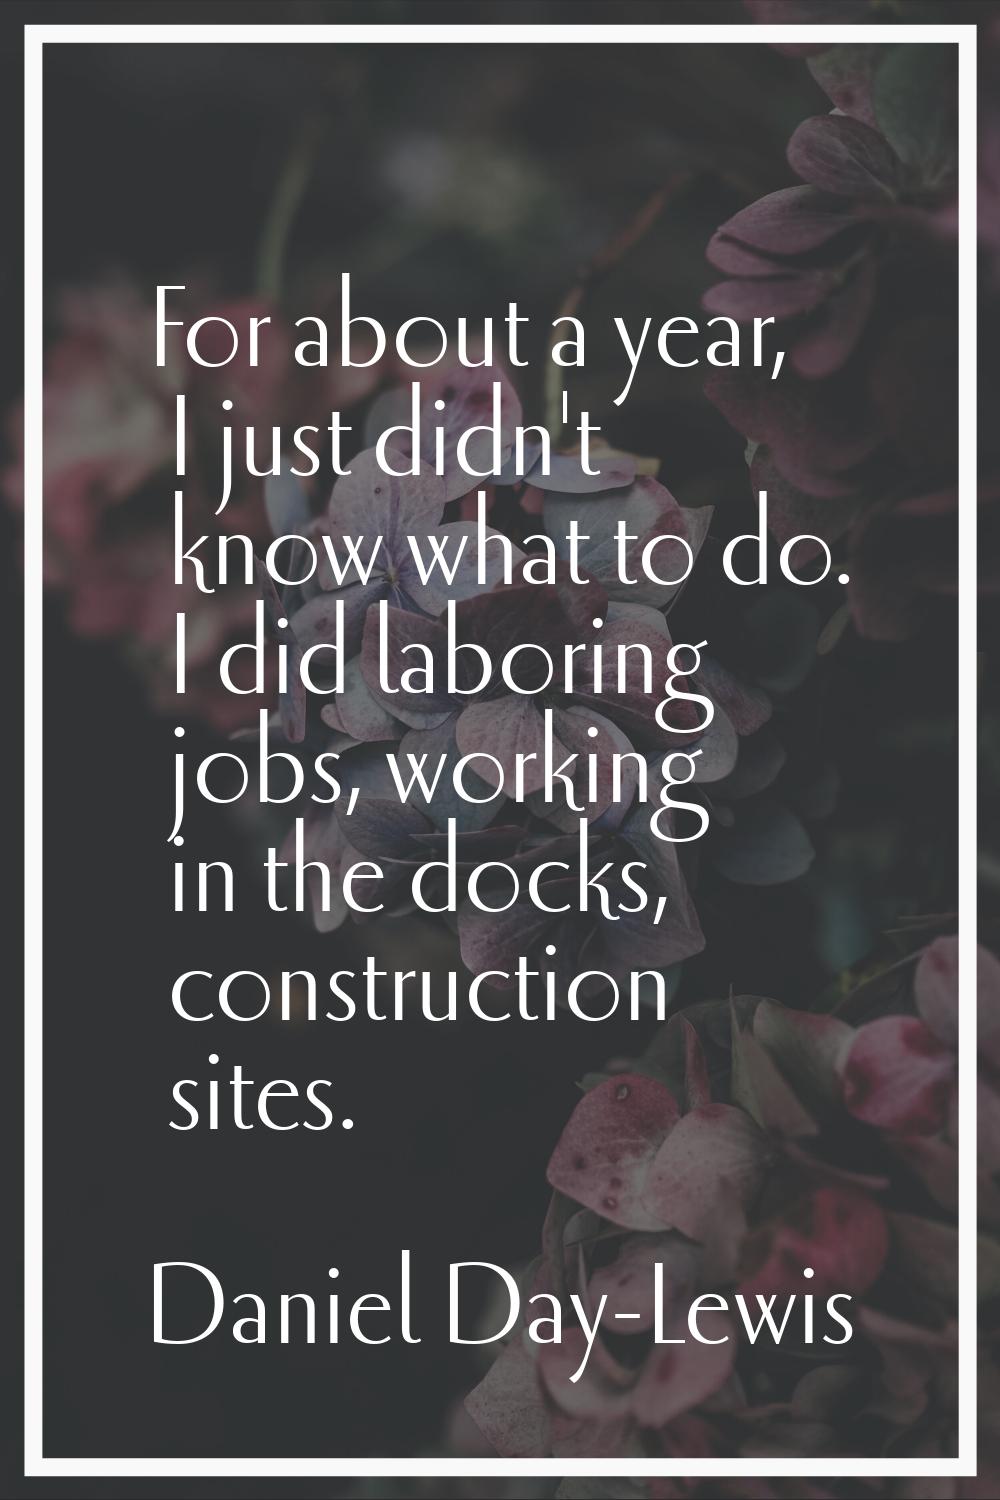 For about a year, I just didn't know what to do. I did laboring jobs, working in the docks, constru